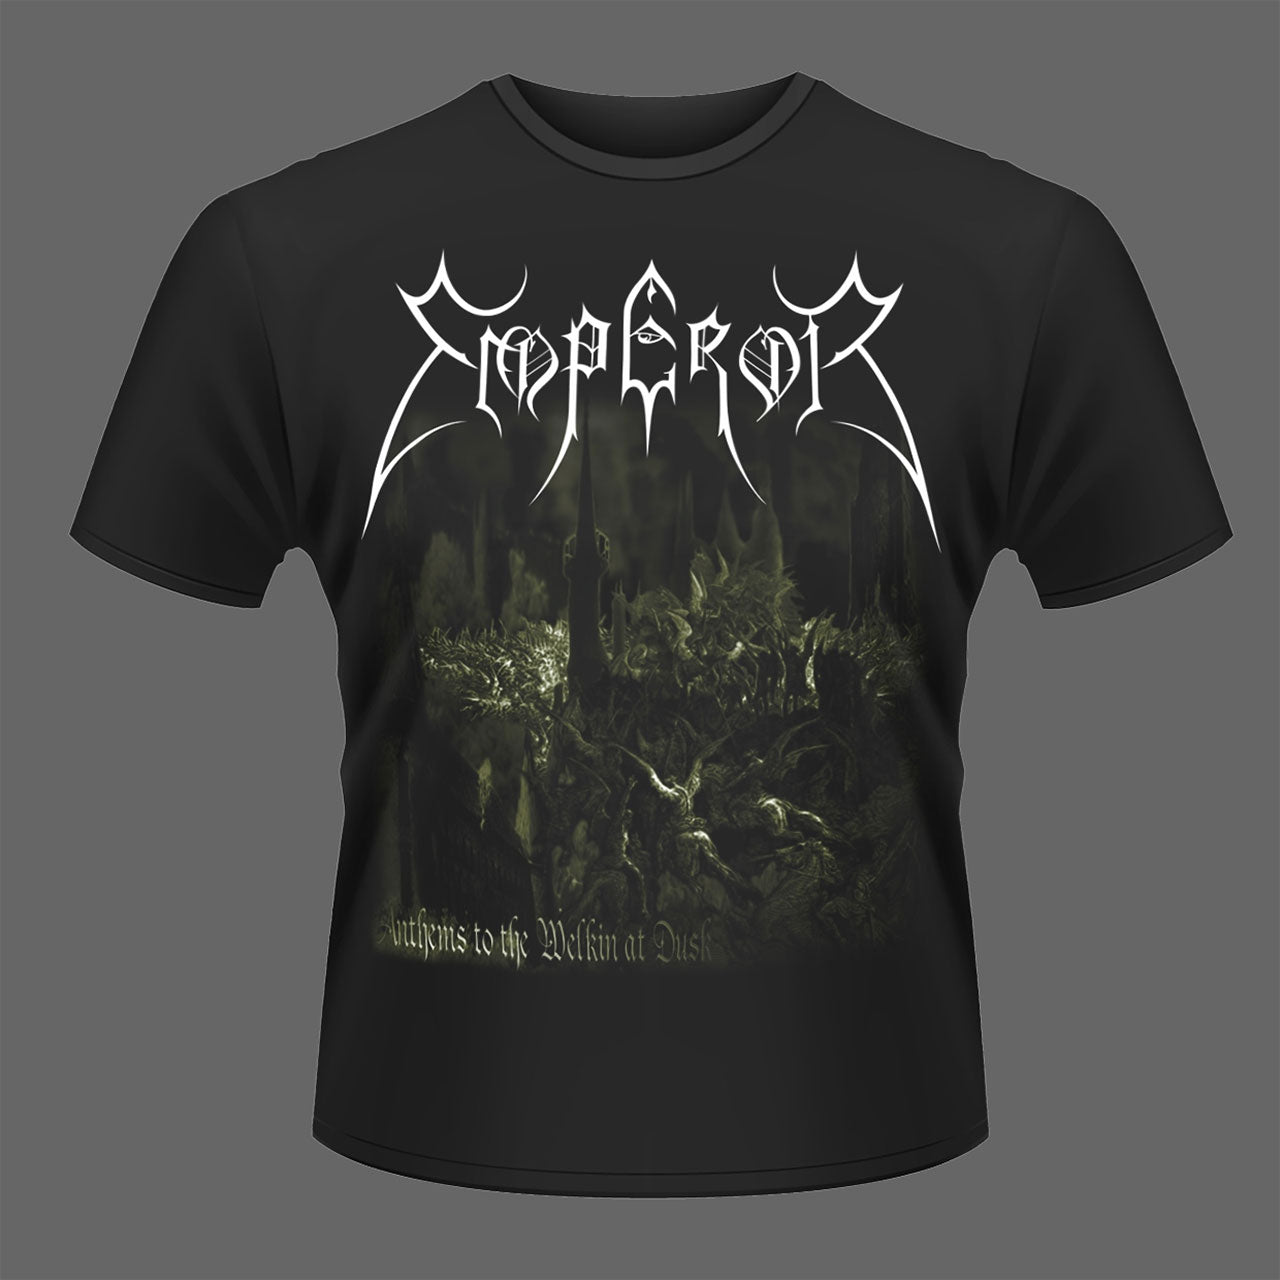 Emperor - Anthems to the Welkin at Dusk (T-Shirt)